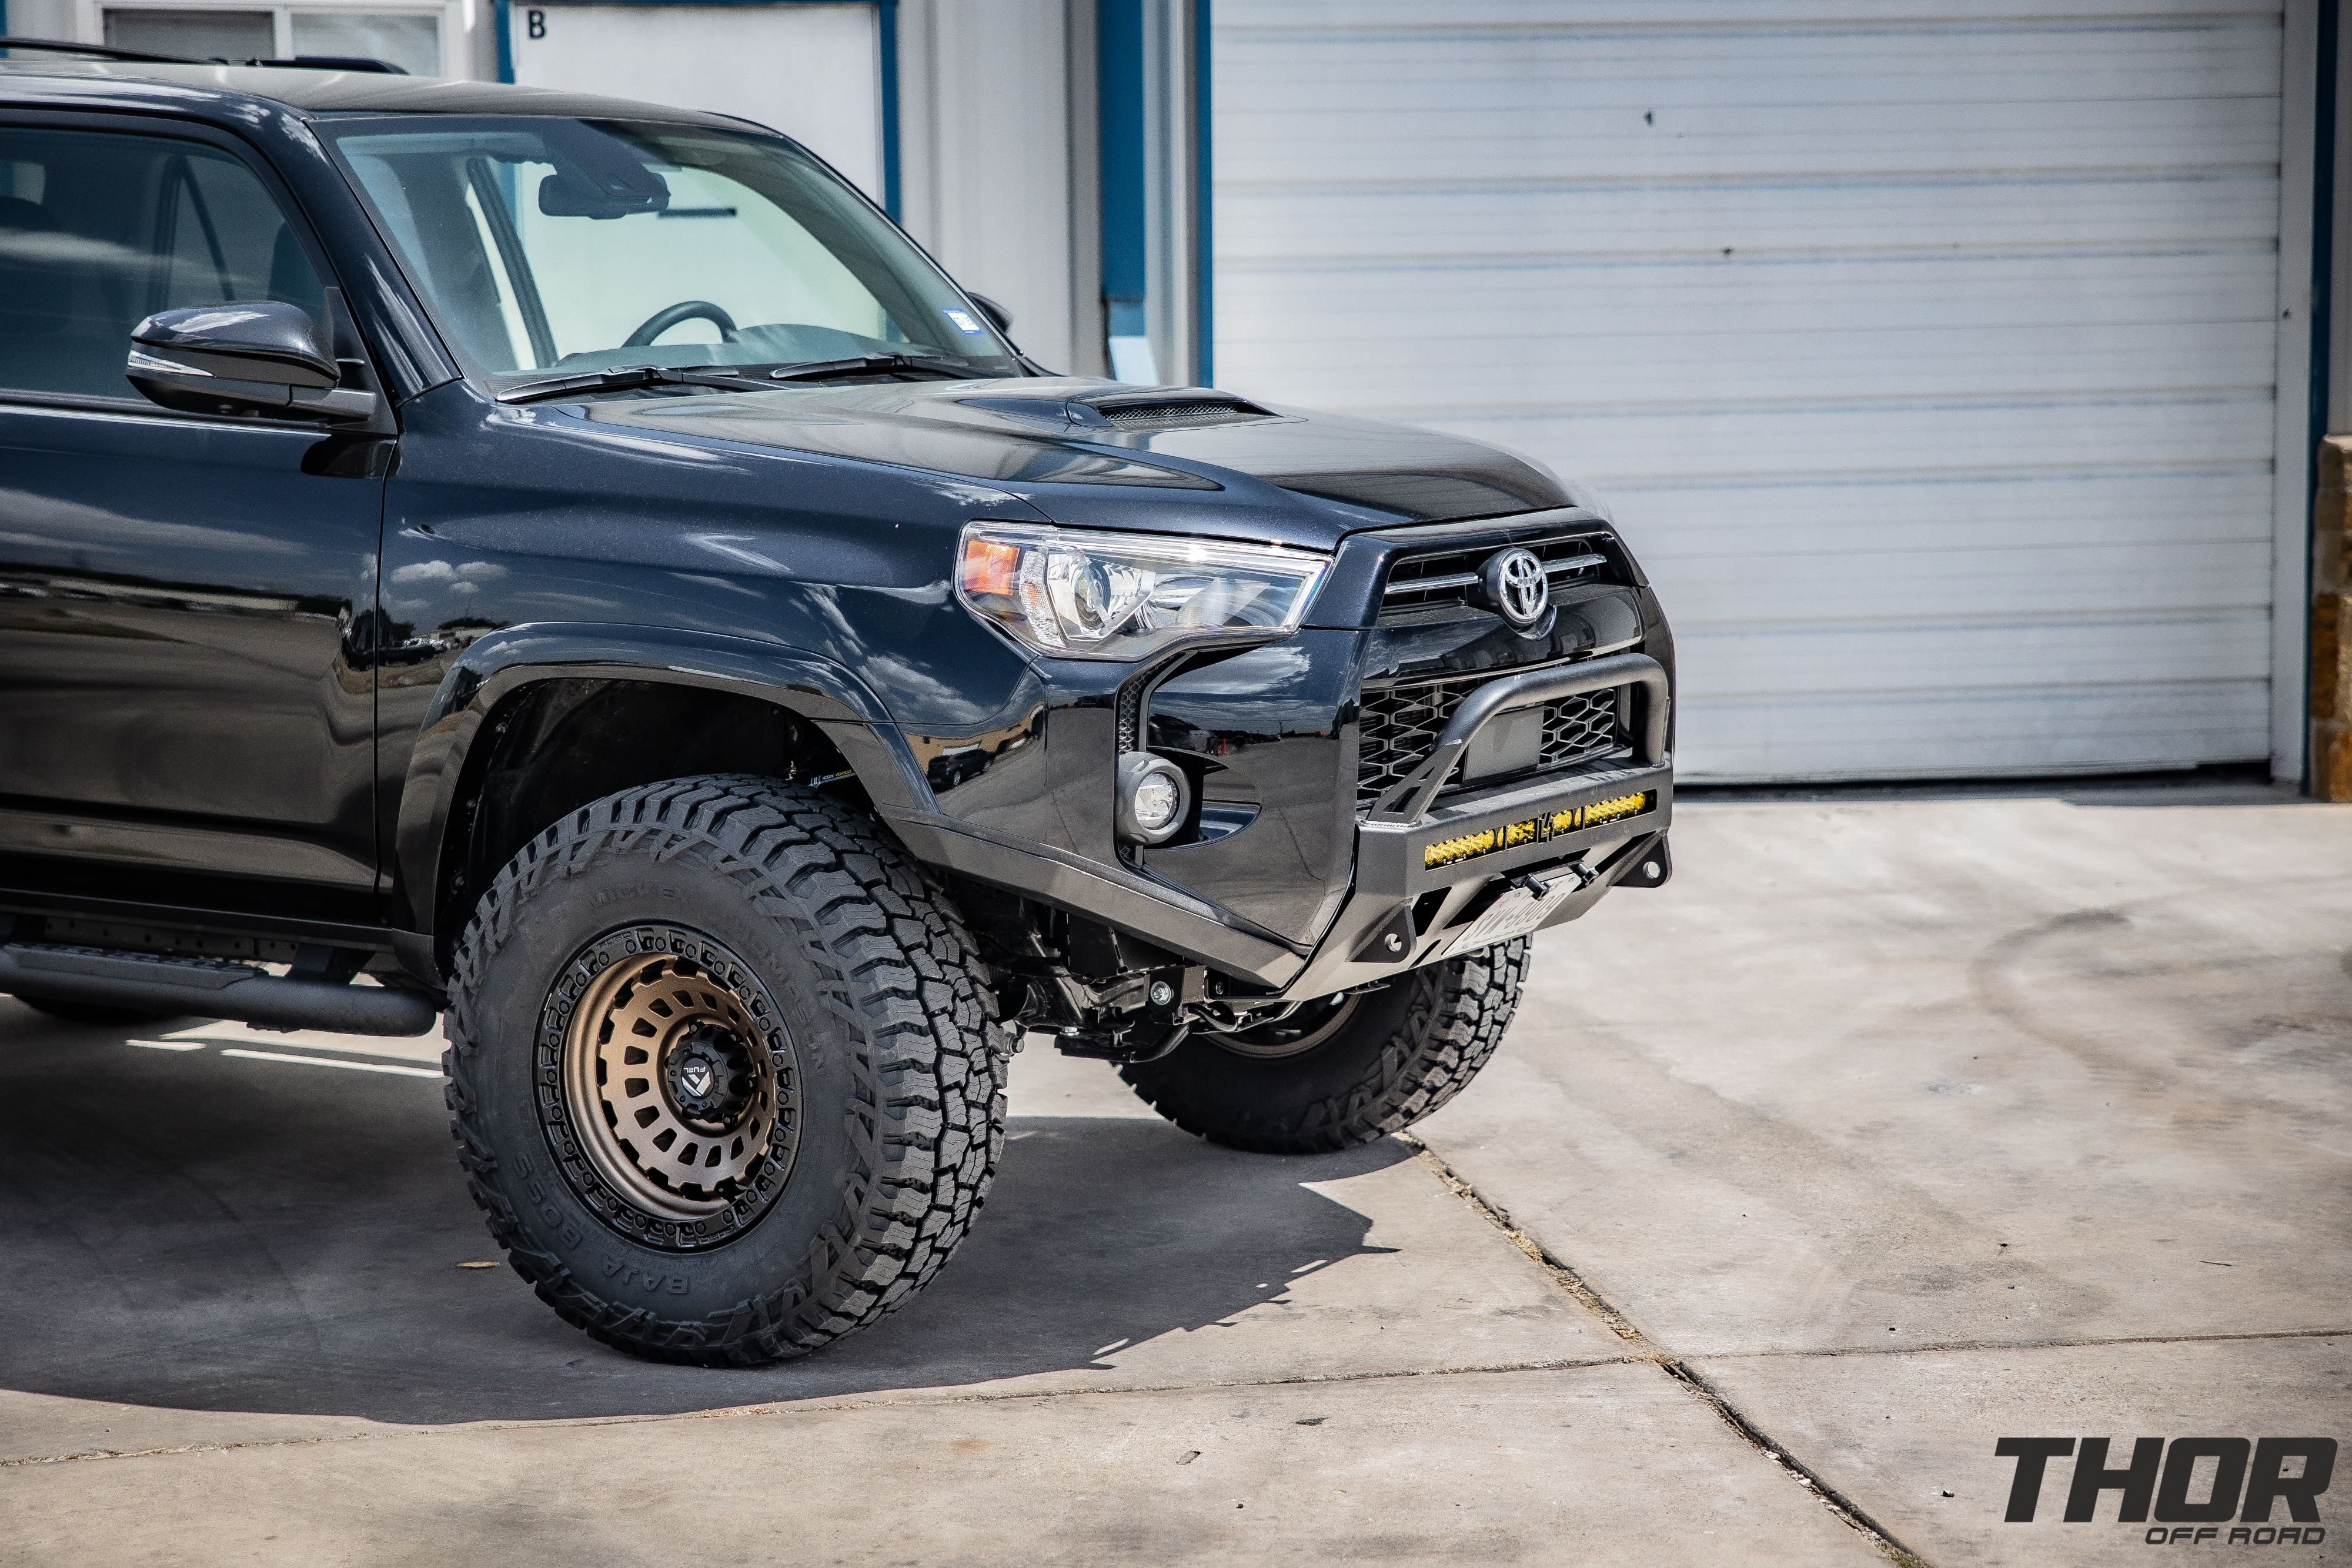 2020 Toyota 4Runner TRD Off-Road in Black with Icon 0-3.5" Stage 5 Suspension System with Tubular UCA, 17x9" Fuel Zephyr Bronze Wheels, 295/70R17 Baja Boss AT Tires, C4 Low Pro Bumper with Lighting, Borla Catback Touring Exhaust